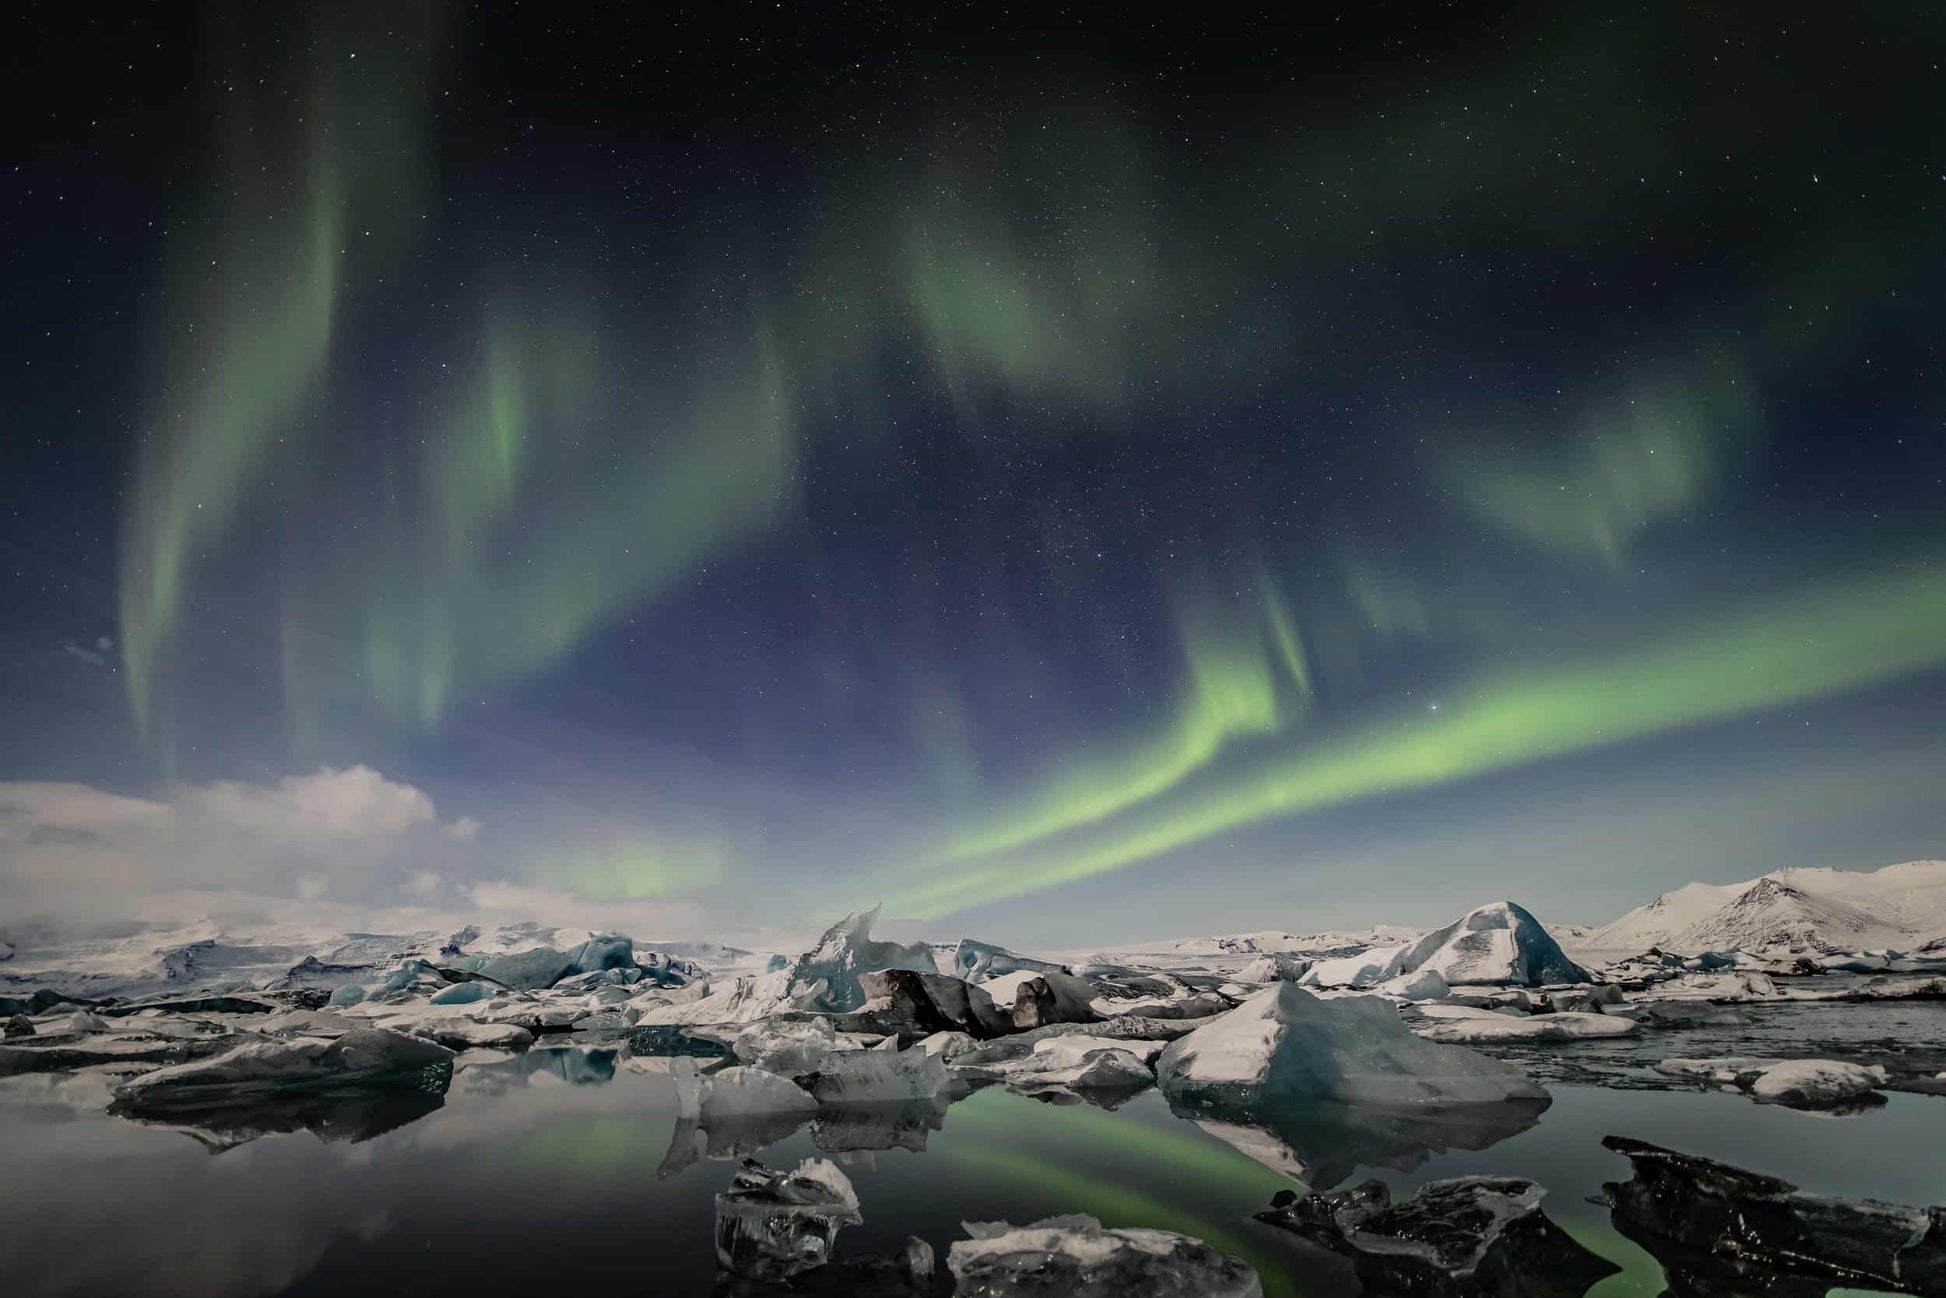 The artpiece 'Jokulvatn' by Markus van Hauten shows a lake at night, with green streaks of the northern lights in the sky.